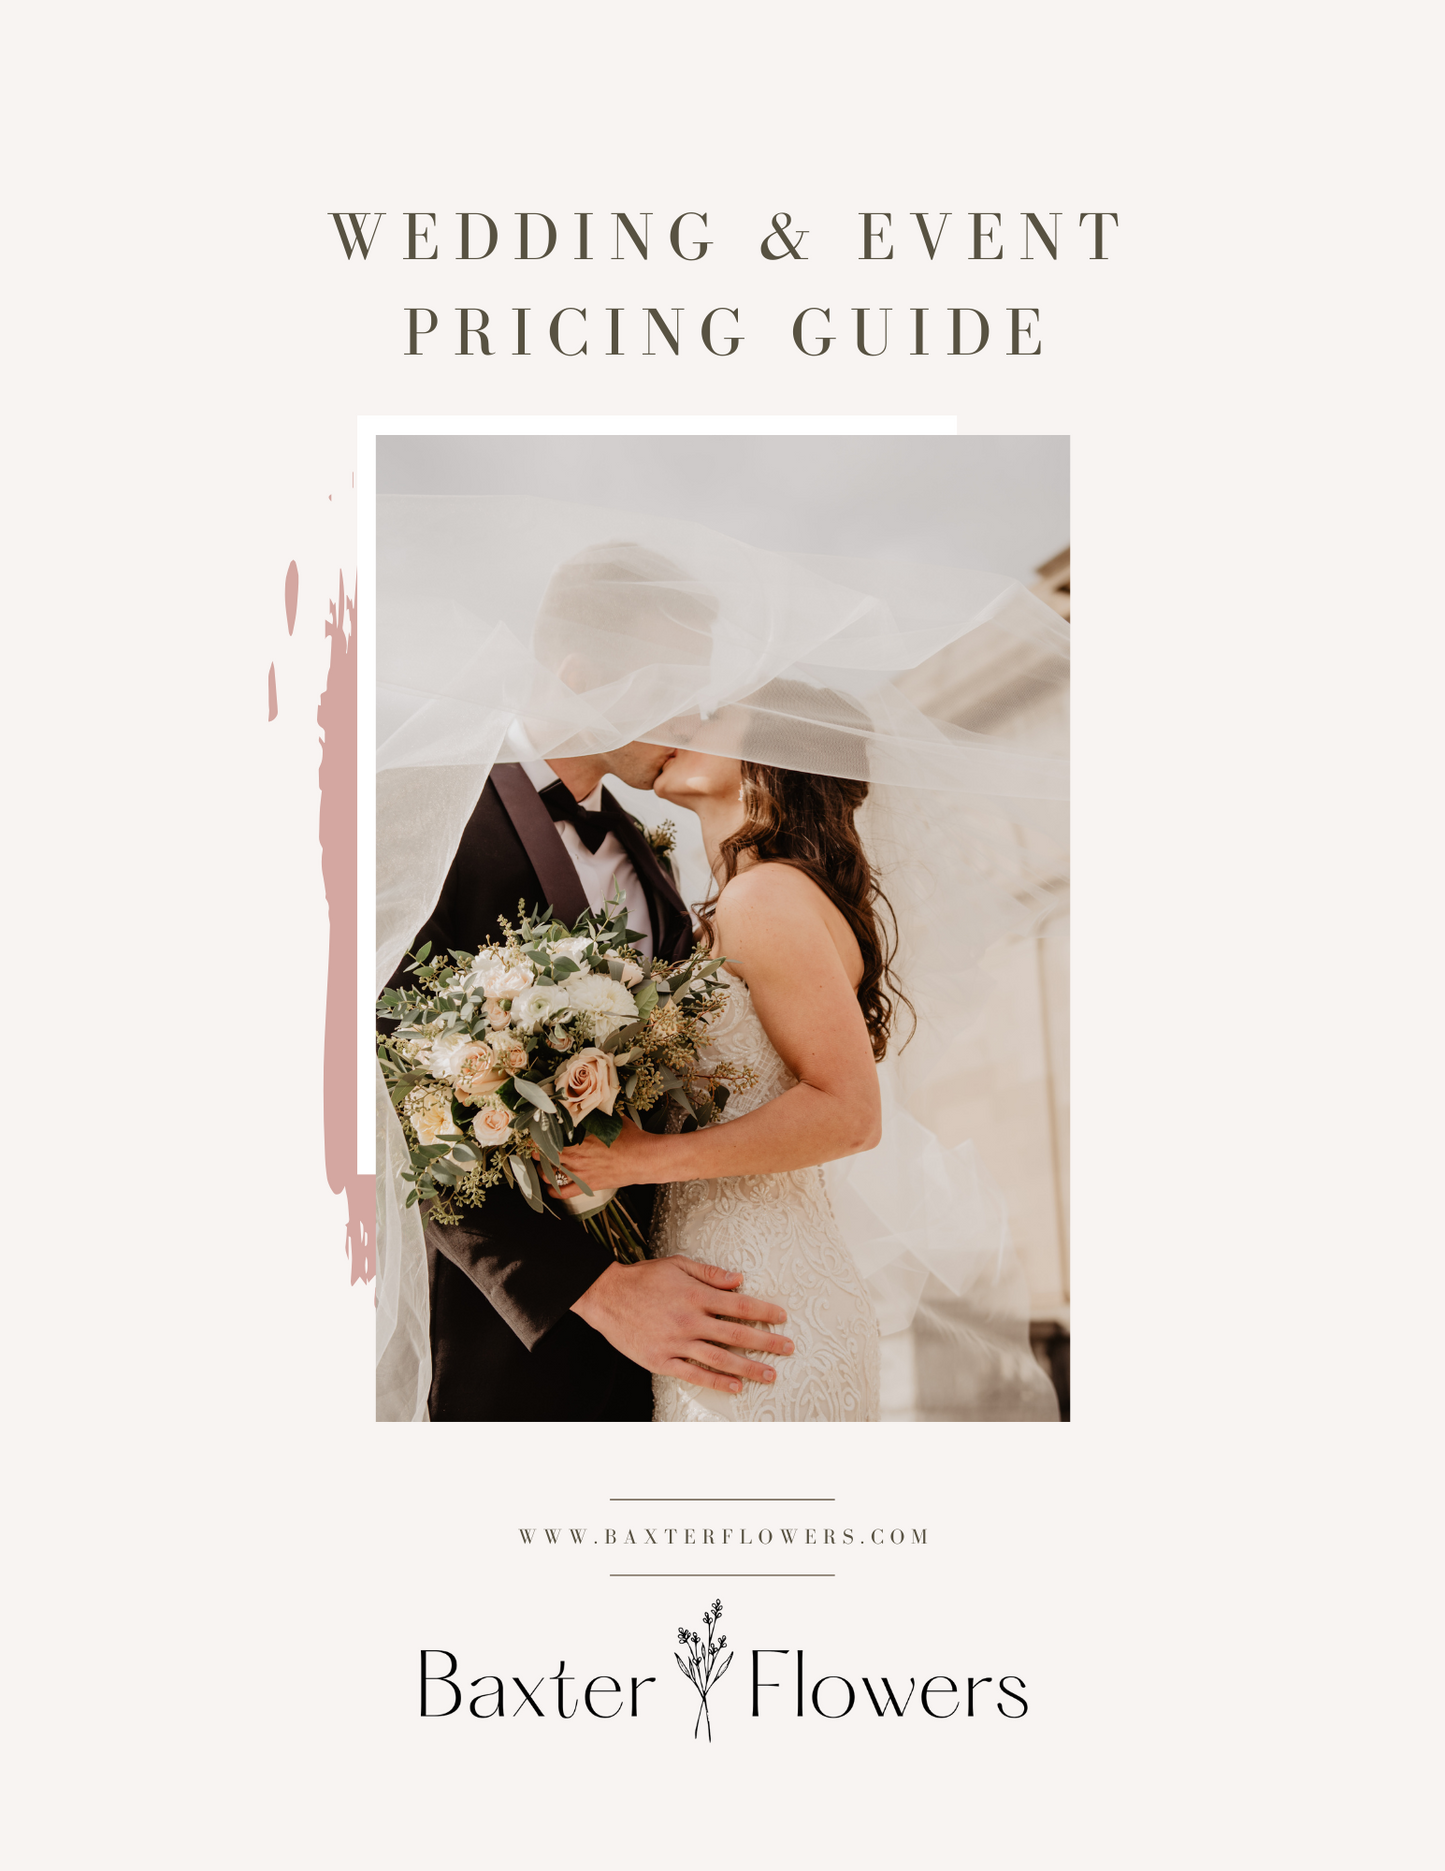 Wedding & Event Pricing Guide